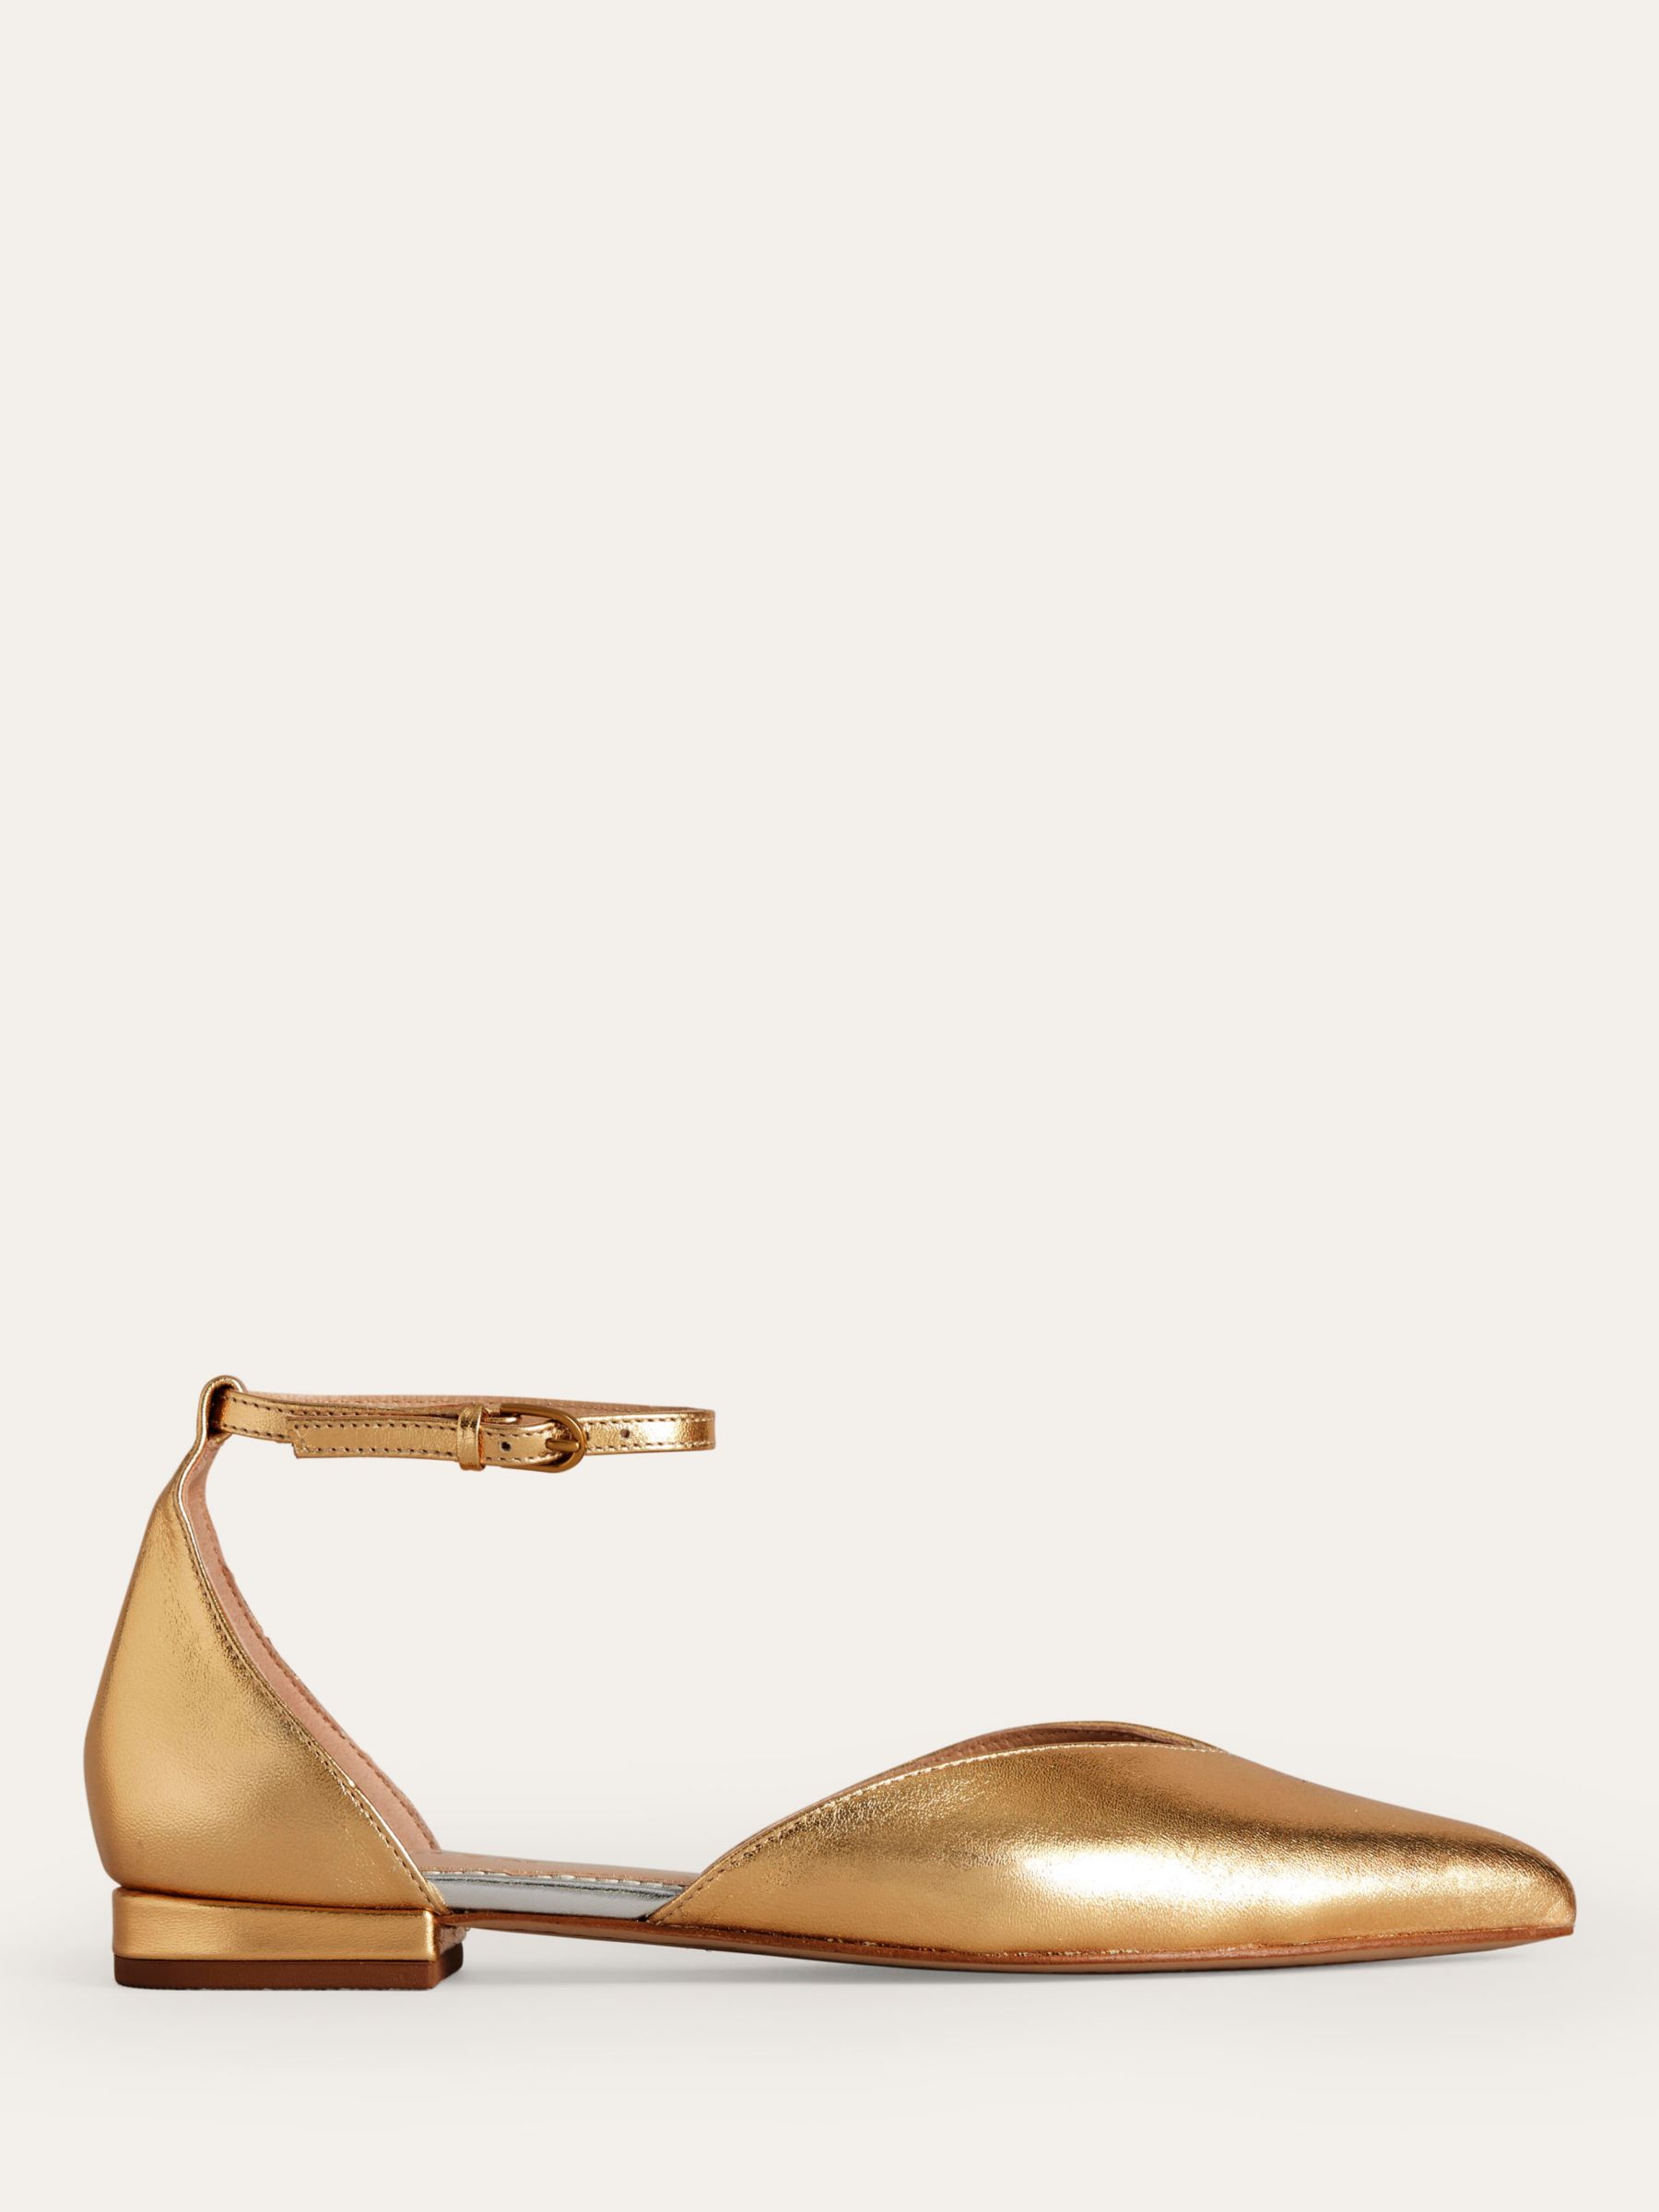 Boden Metallic Leather Ankle Strap Pointed Flats, Gold, 4